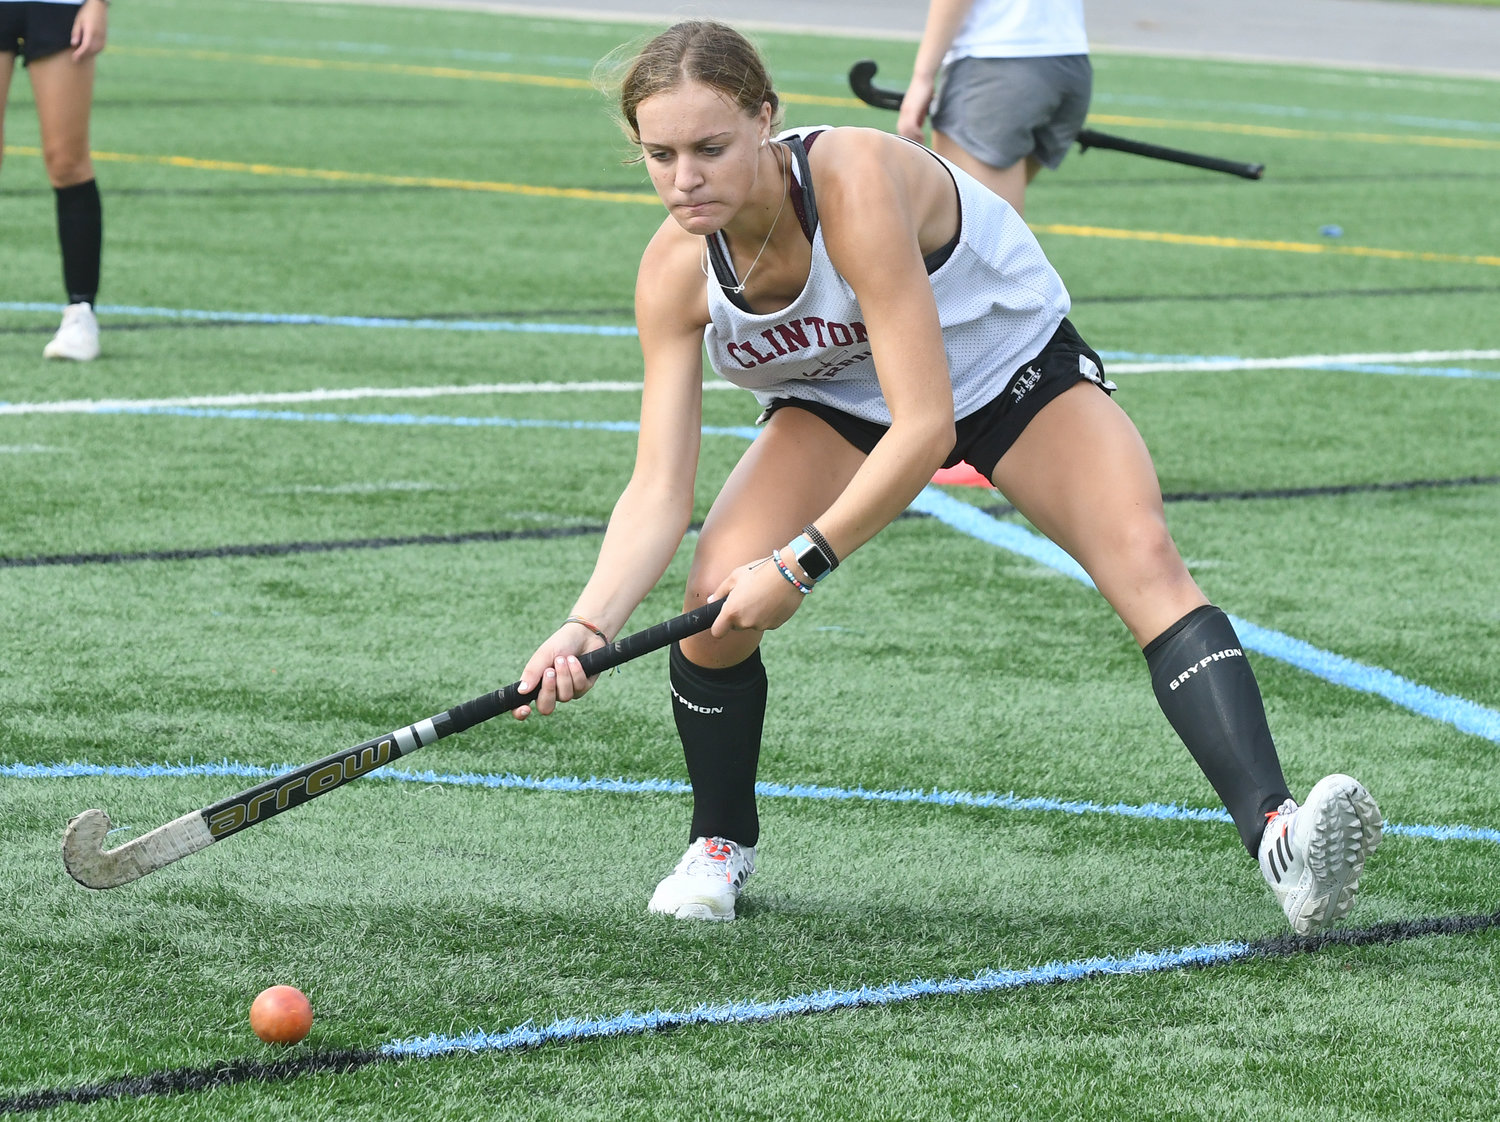 SHOT ON GOAL — Clinton field hockey sophomore striker Lauren Rey takes aim at the goal during a Thursday morning practice on the Hamilton College turf in Clinton.